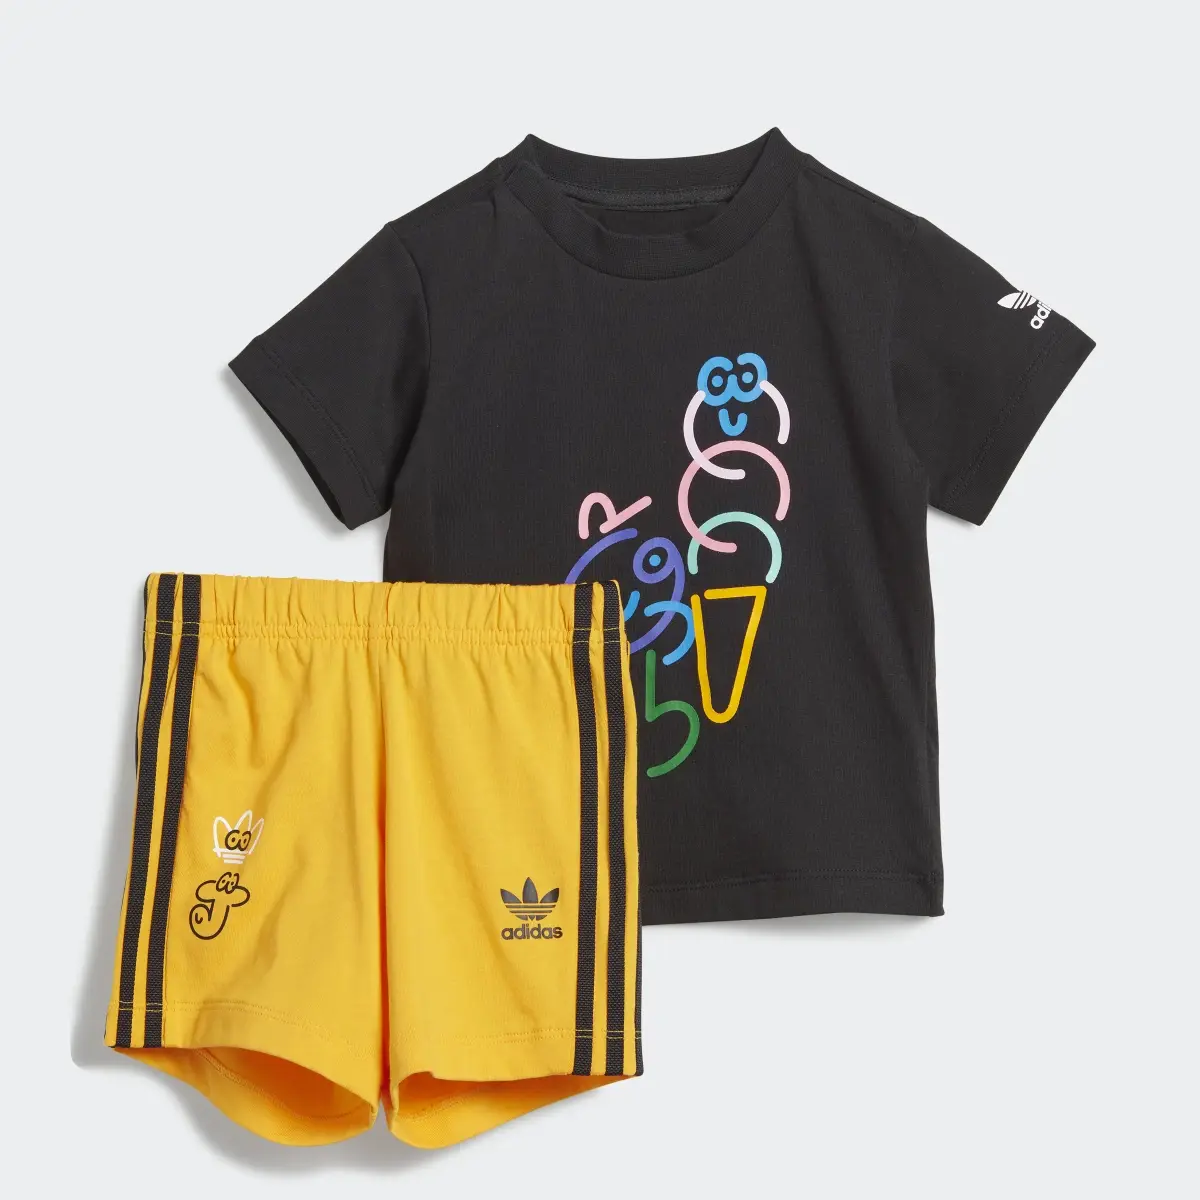 Adidas Completo adidas x James Jarvis Shorts and Tee. 1